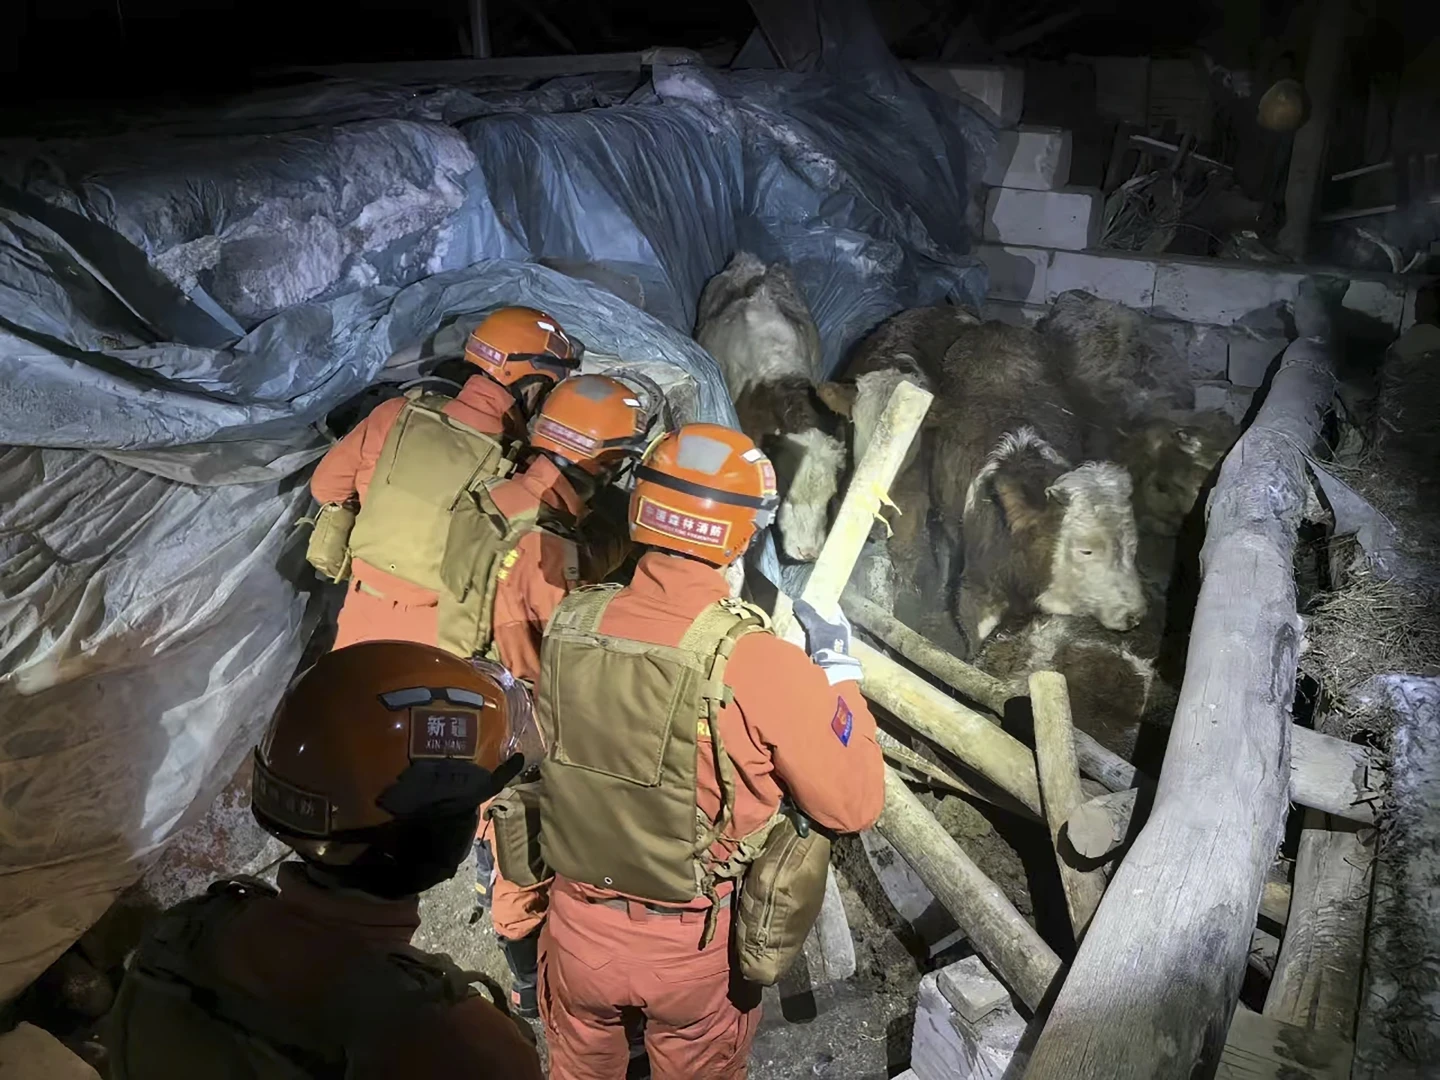 Earthquake Strikes Western Xinjiang, China: Rescue Efforts Underway Amidst Extensive Damage